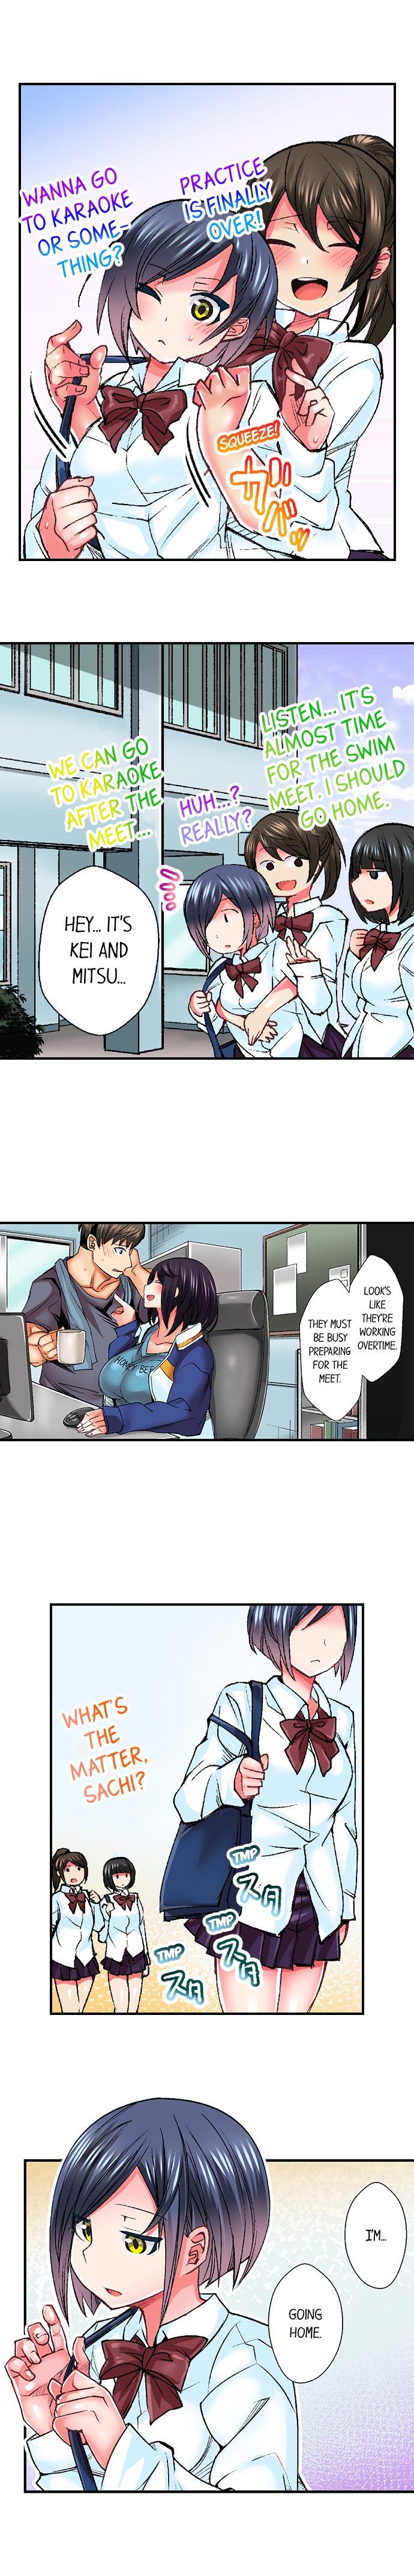 Athlete's Strong Sex Drive Ch. 1 - 9 79